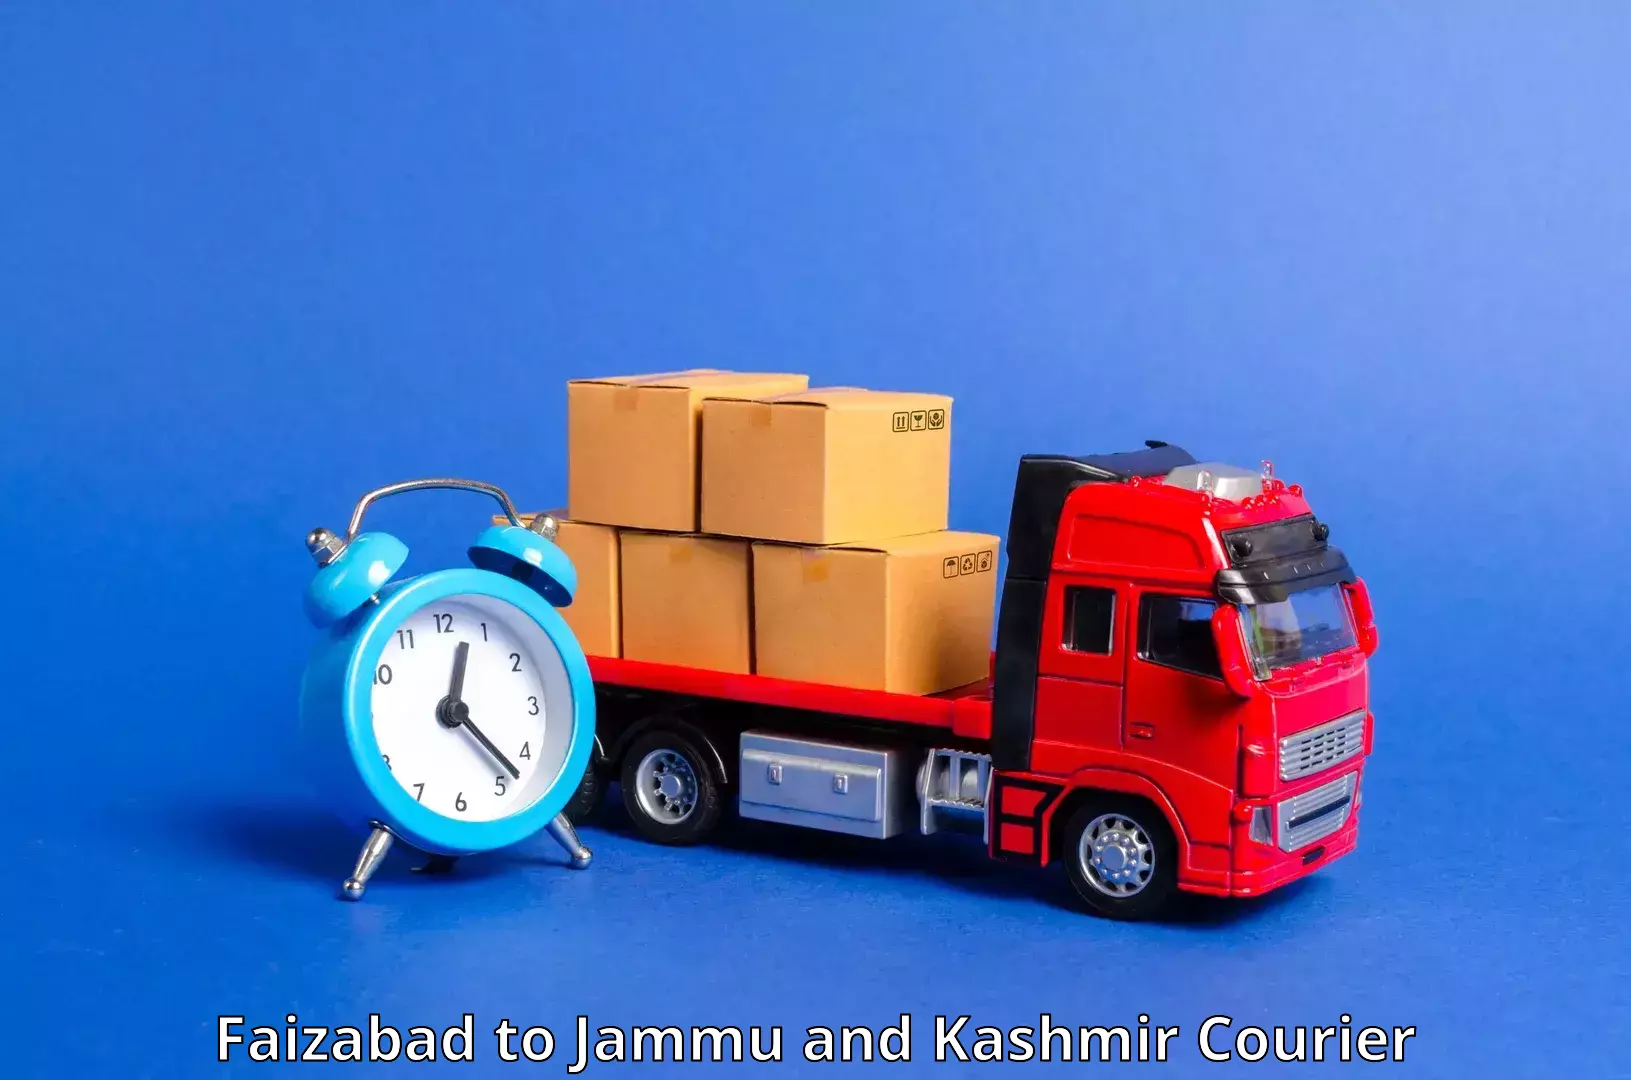 Streamlined delivery processes Faizabad to Baramulla